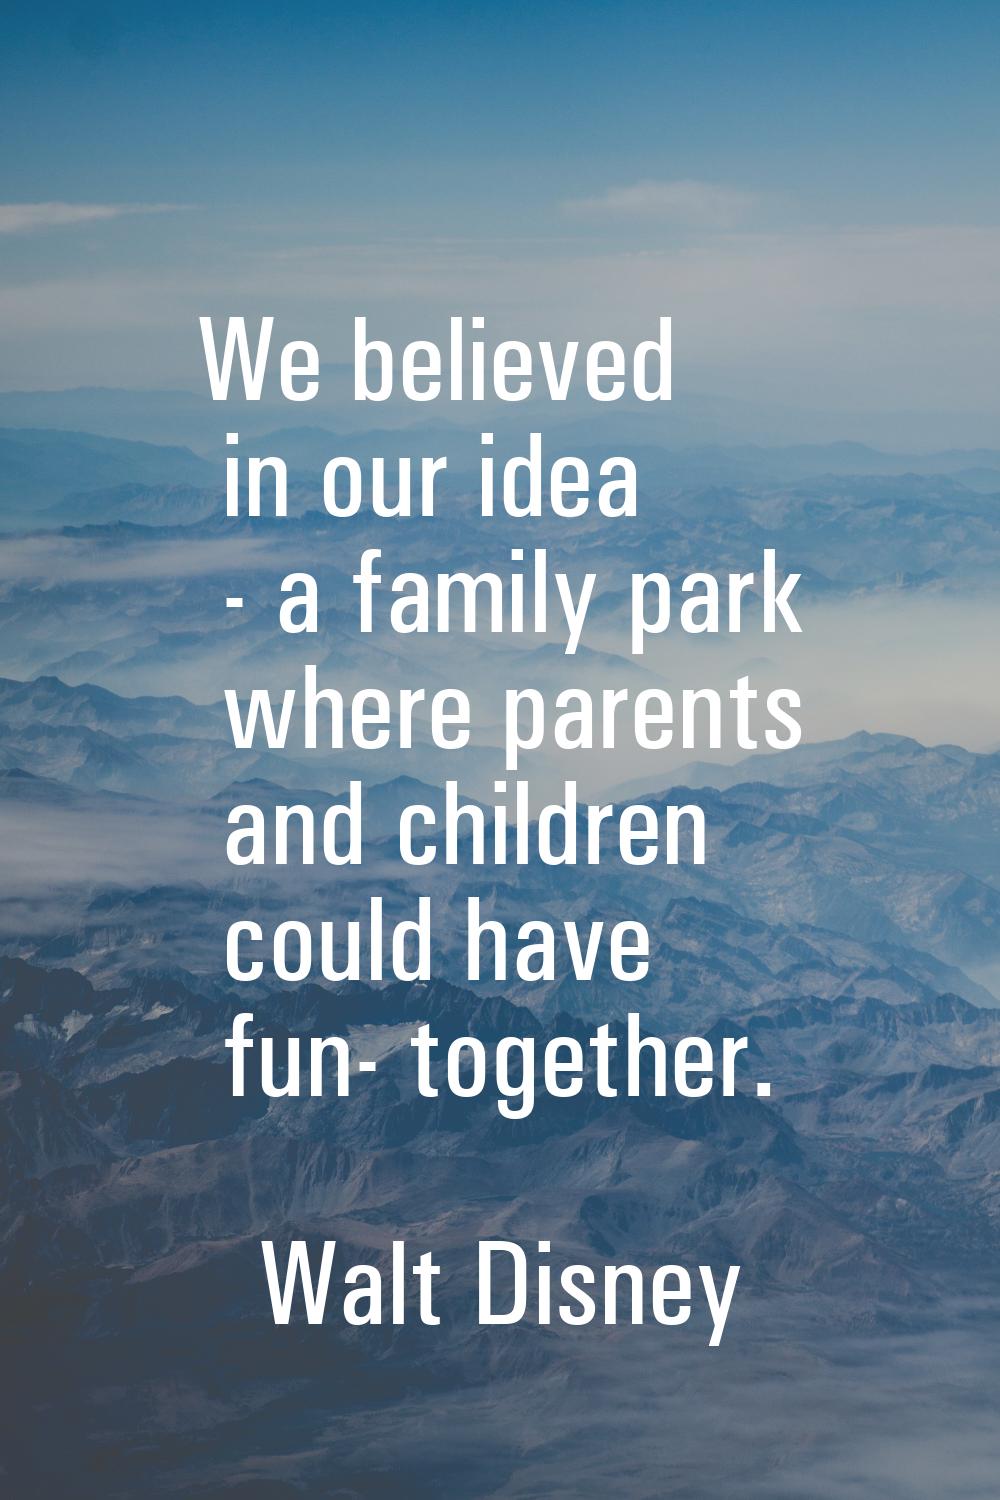 We believed in our idea - a family park where parents and children could have fun- together.